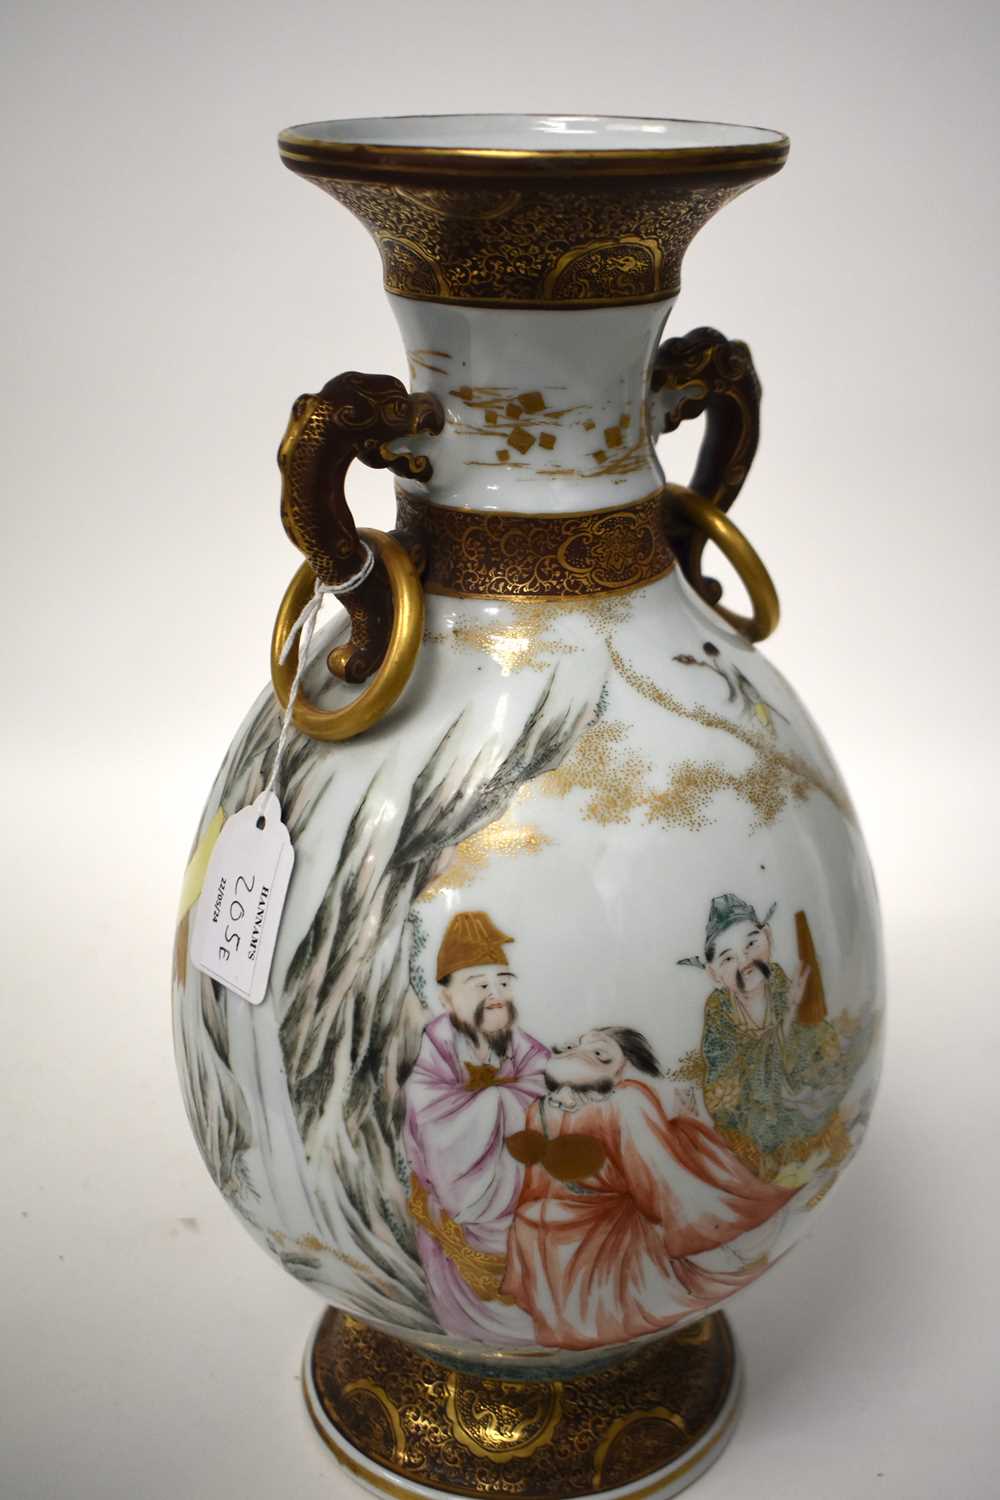 A LARGE 19TH CENTURY JAPANESE MEIJI PERIOD TWIN HANDLED KUTANI PORCELAIN VASE painted with figures - Image 16 of 21